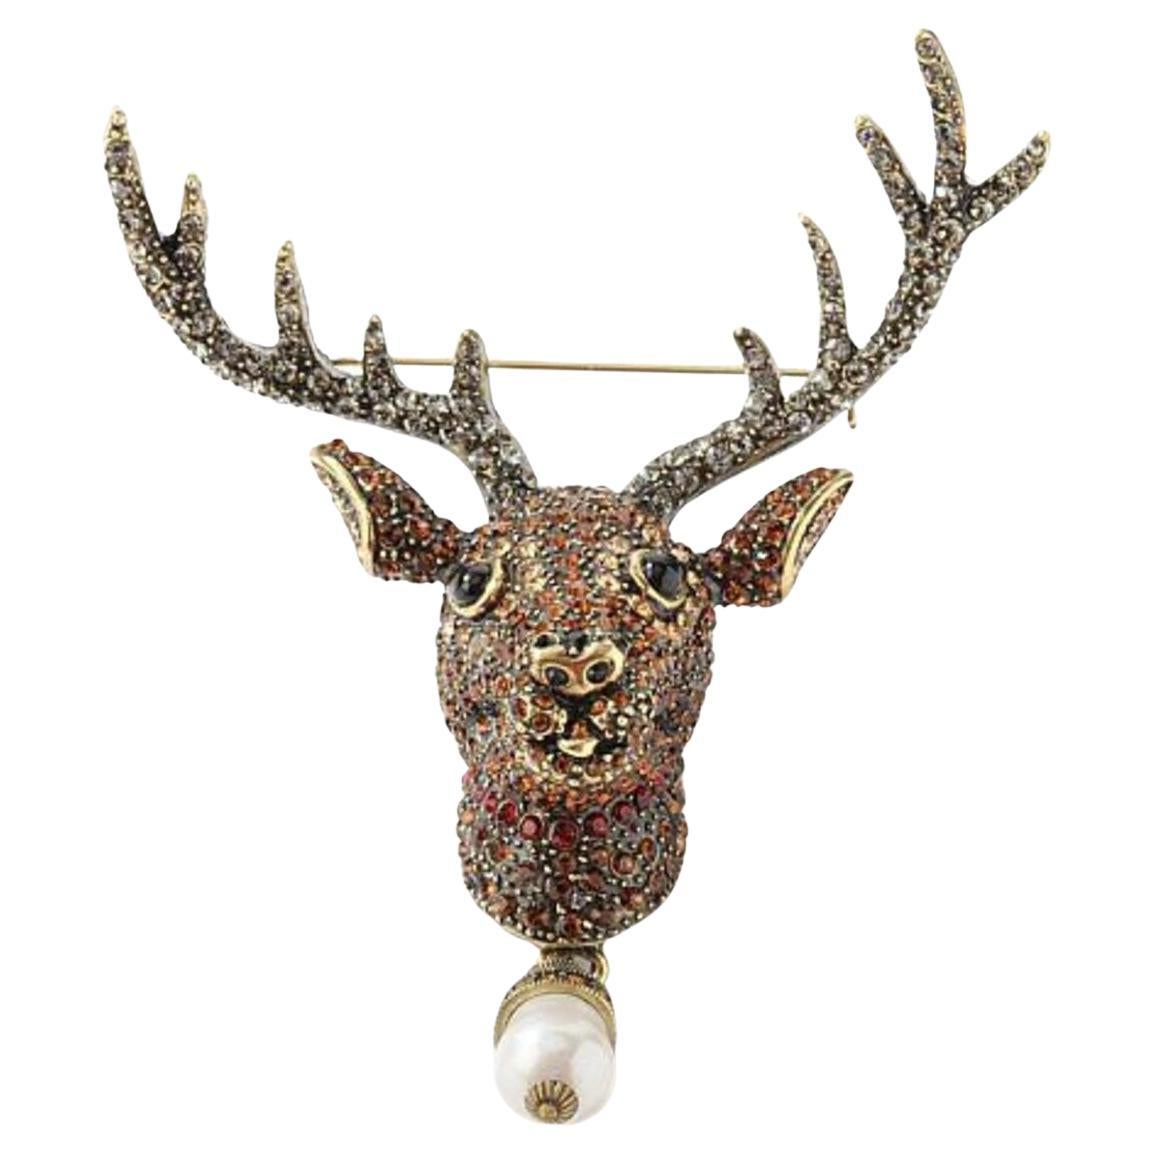 Heidi Daus Rudy Reindeer Crystal Accented Pin Brooch Brand New in Box For Sale